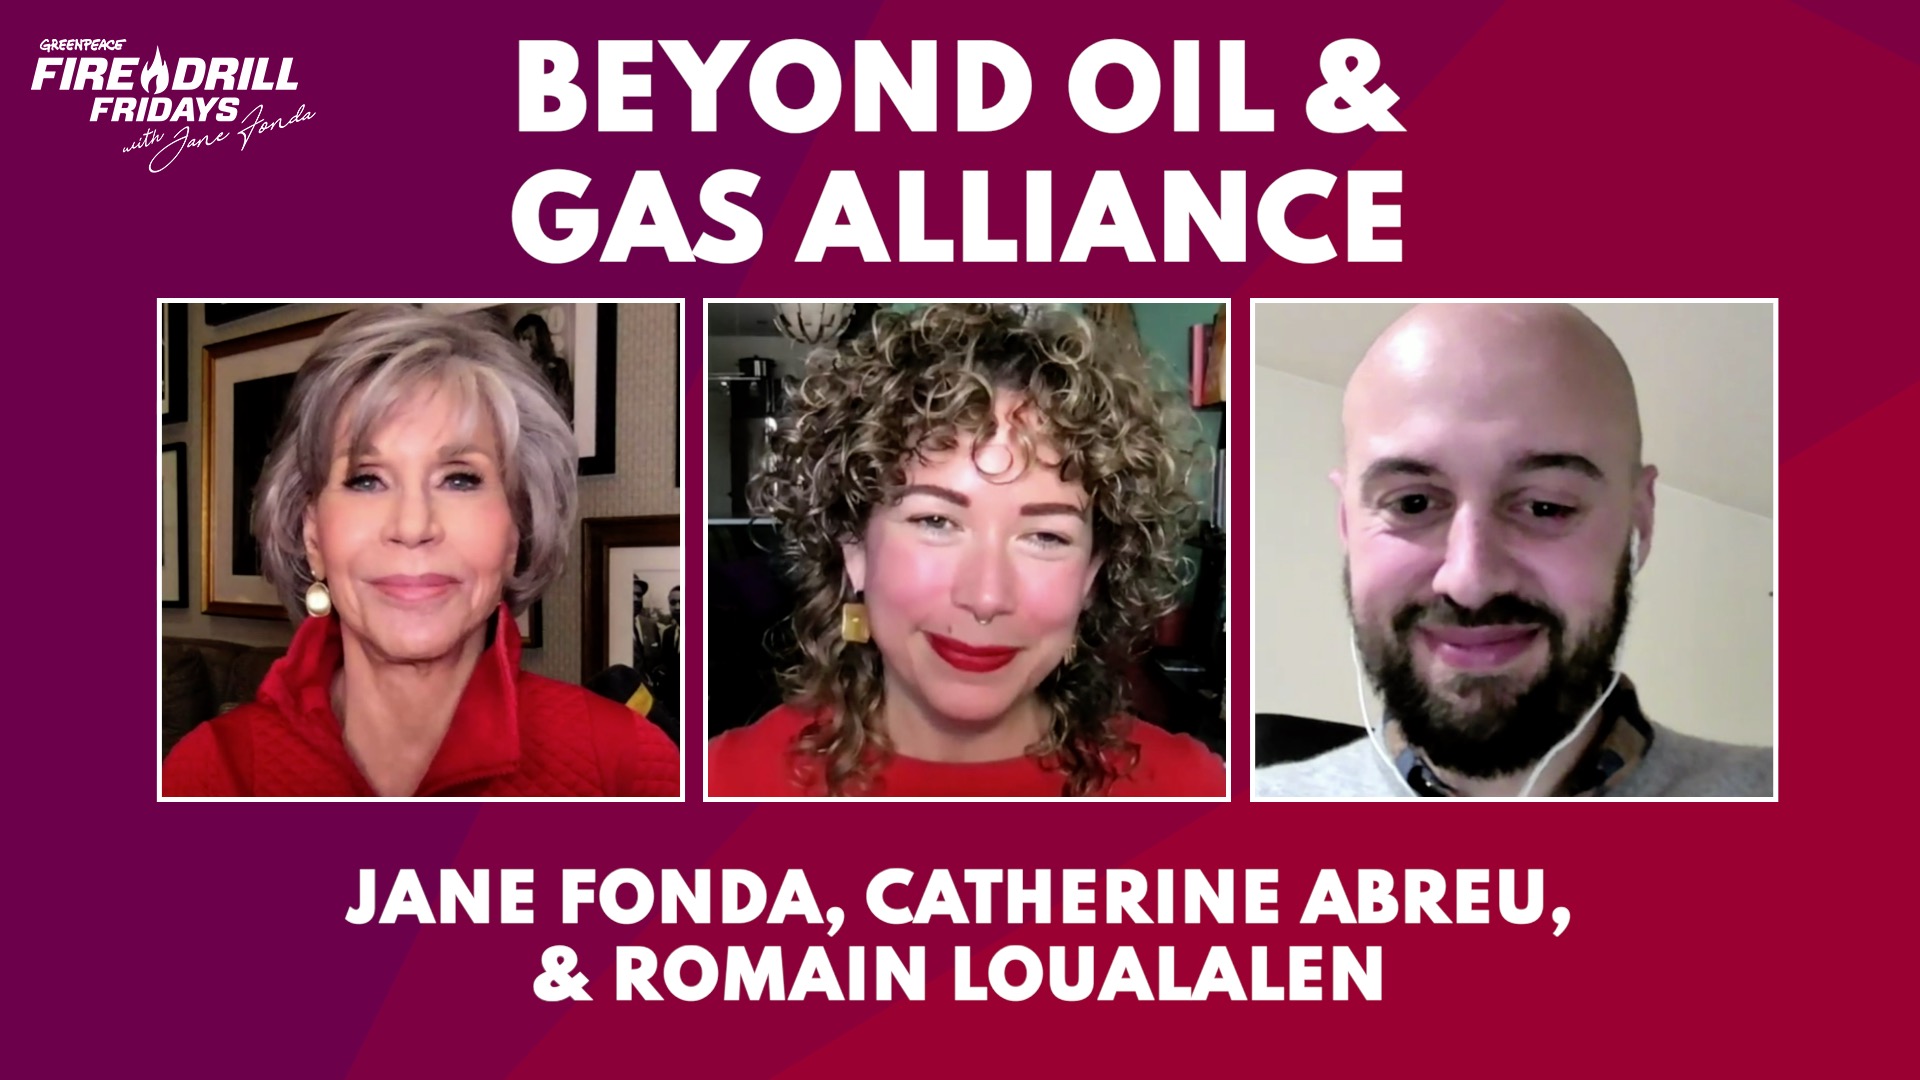 Watch Beyond Oil and Gas Alliance | Fire Drill Friday with Catherine Abreu & Romain Ioualalen